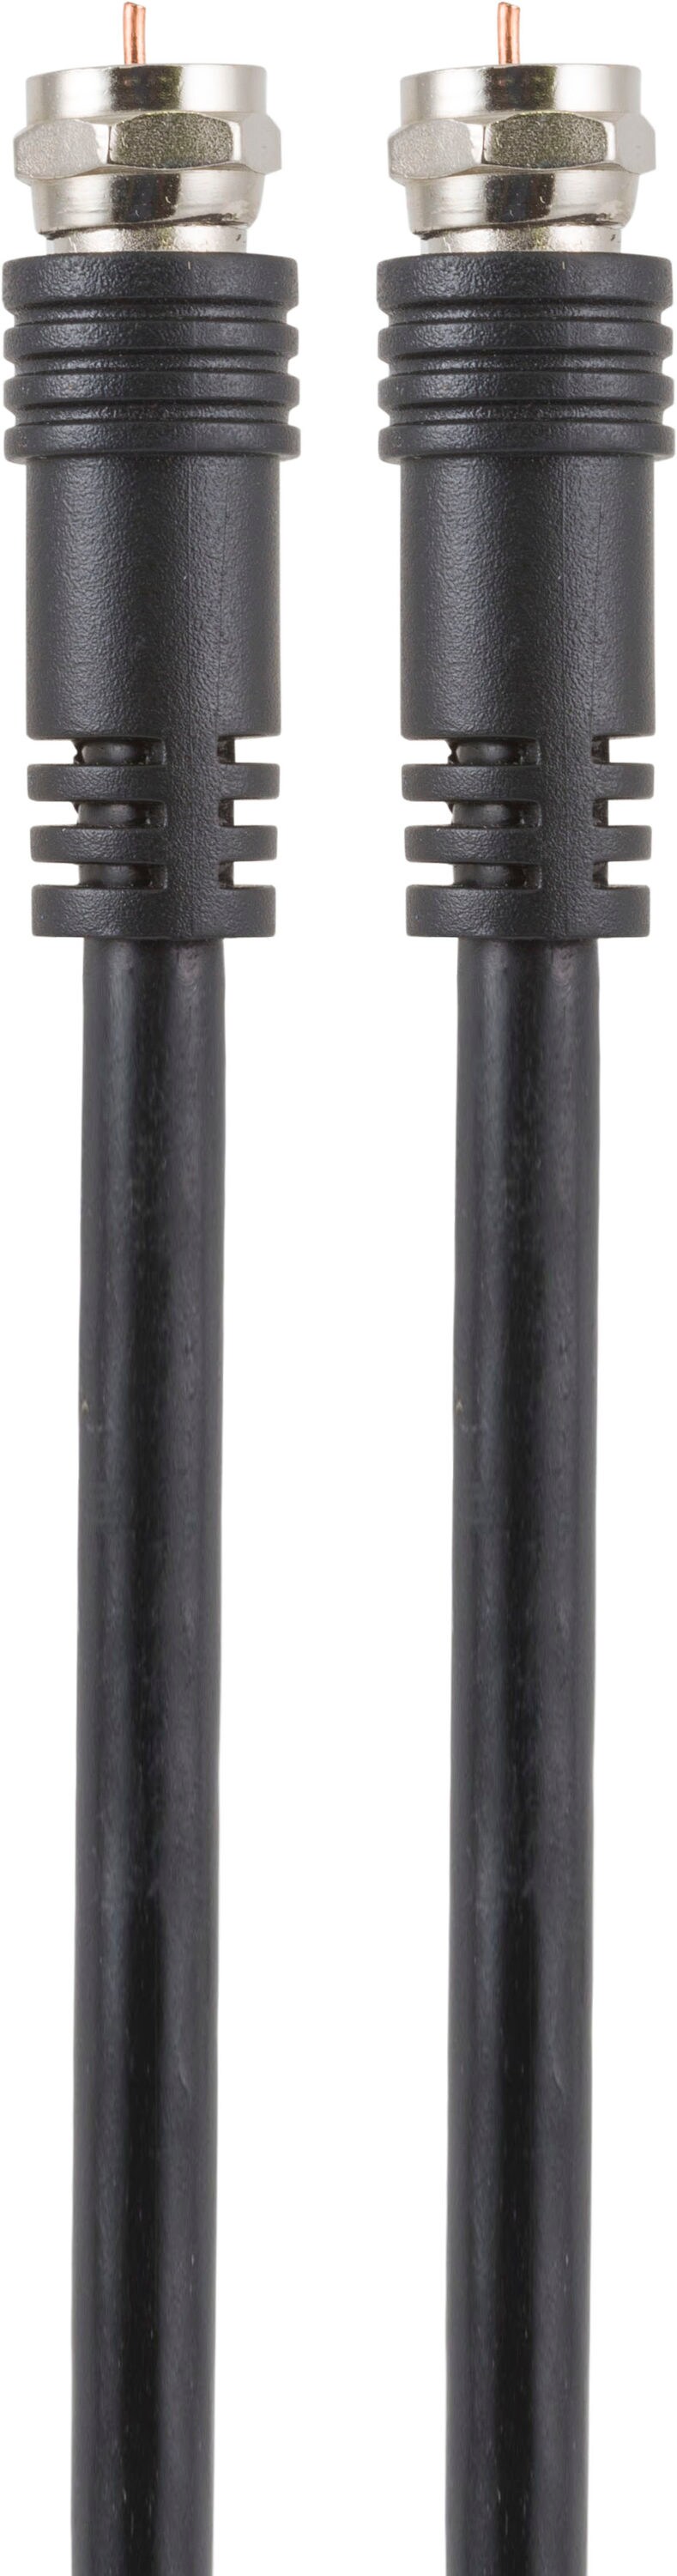 Commercial Electric 15 ft. RG-6 Coaxial Cable - Black Y278901